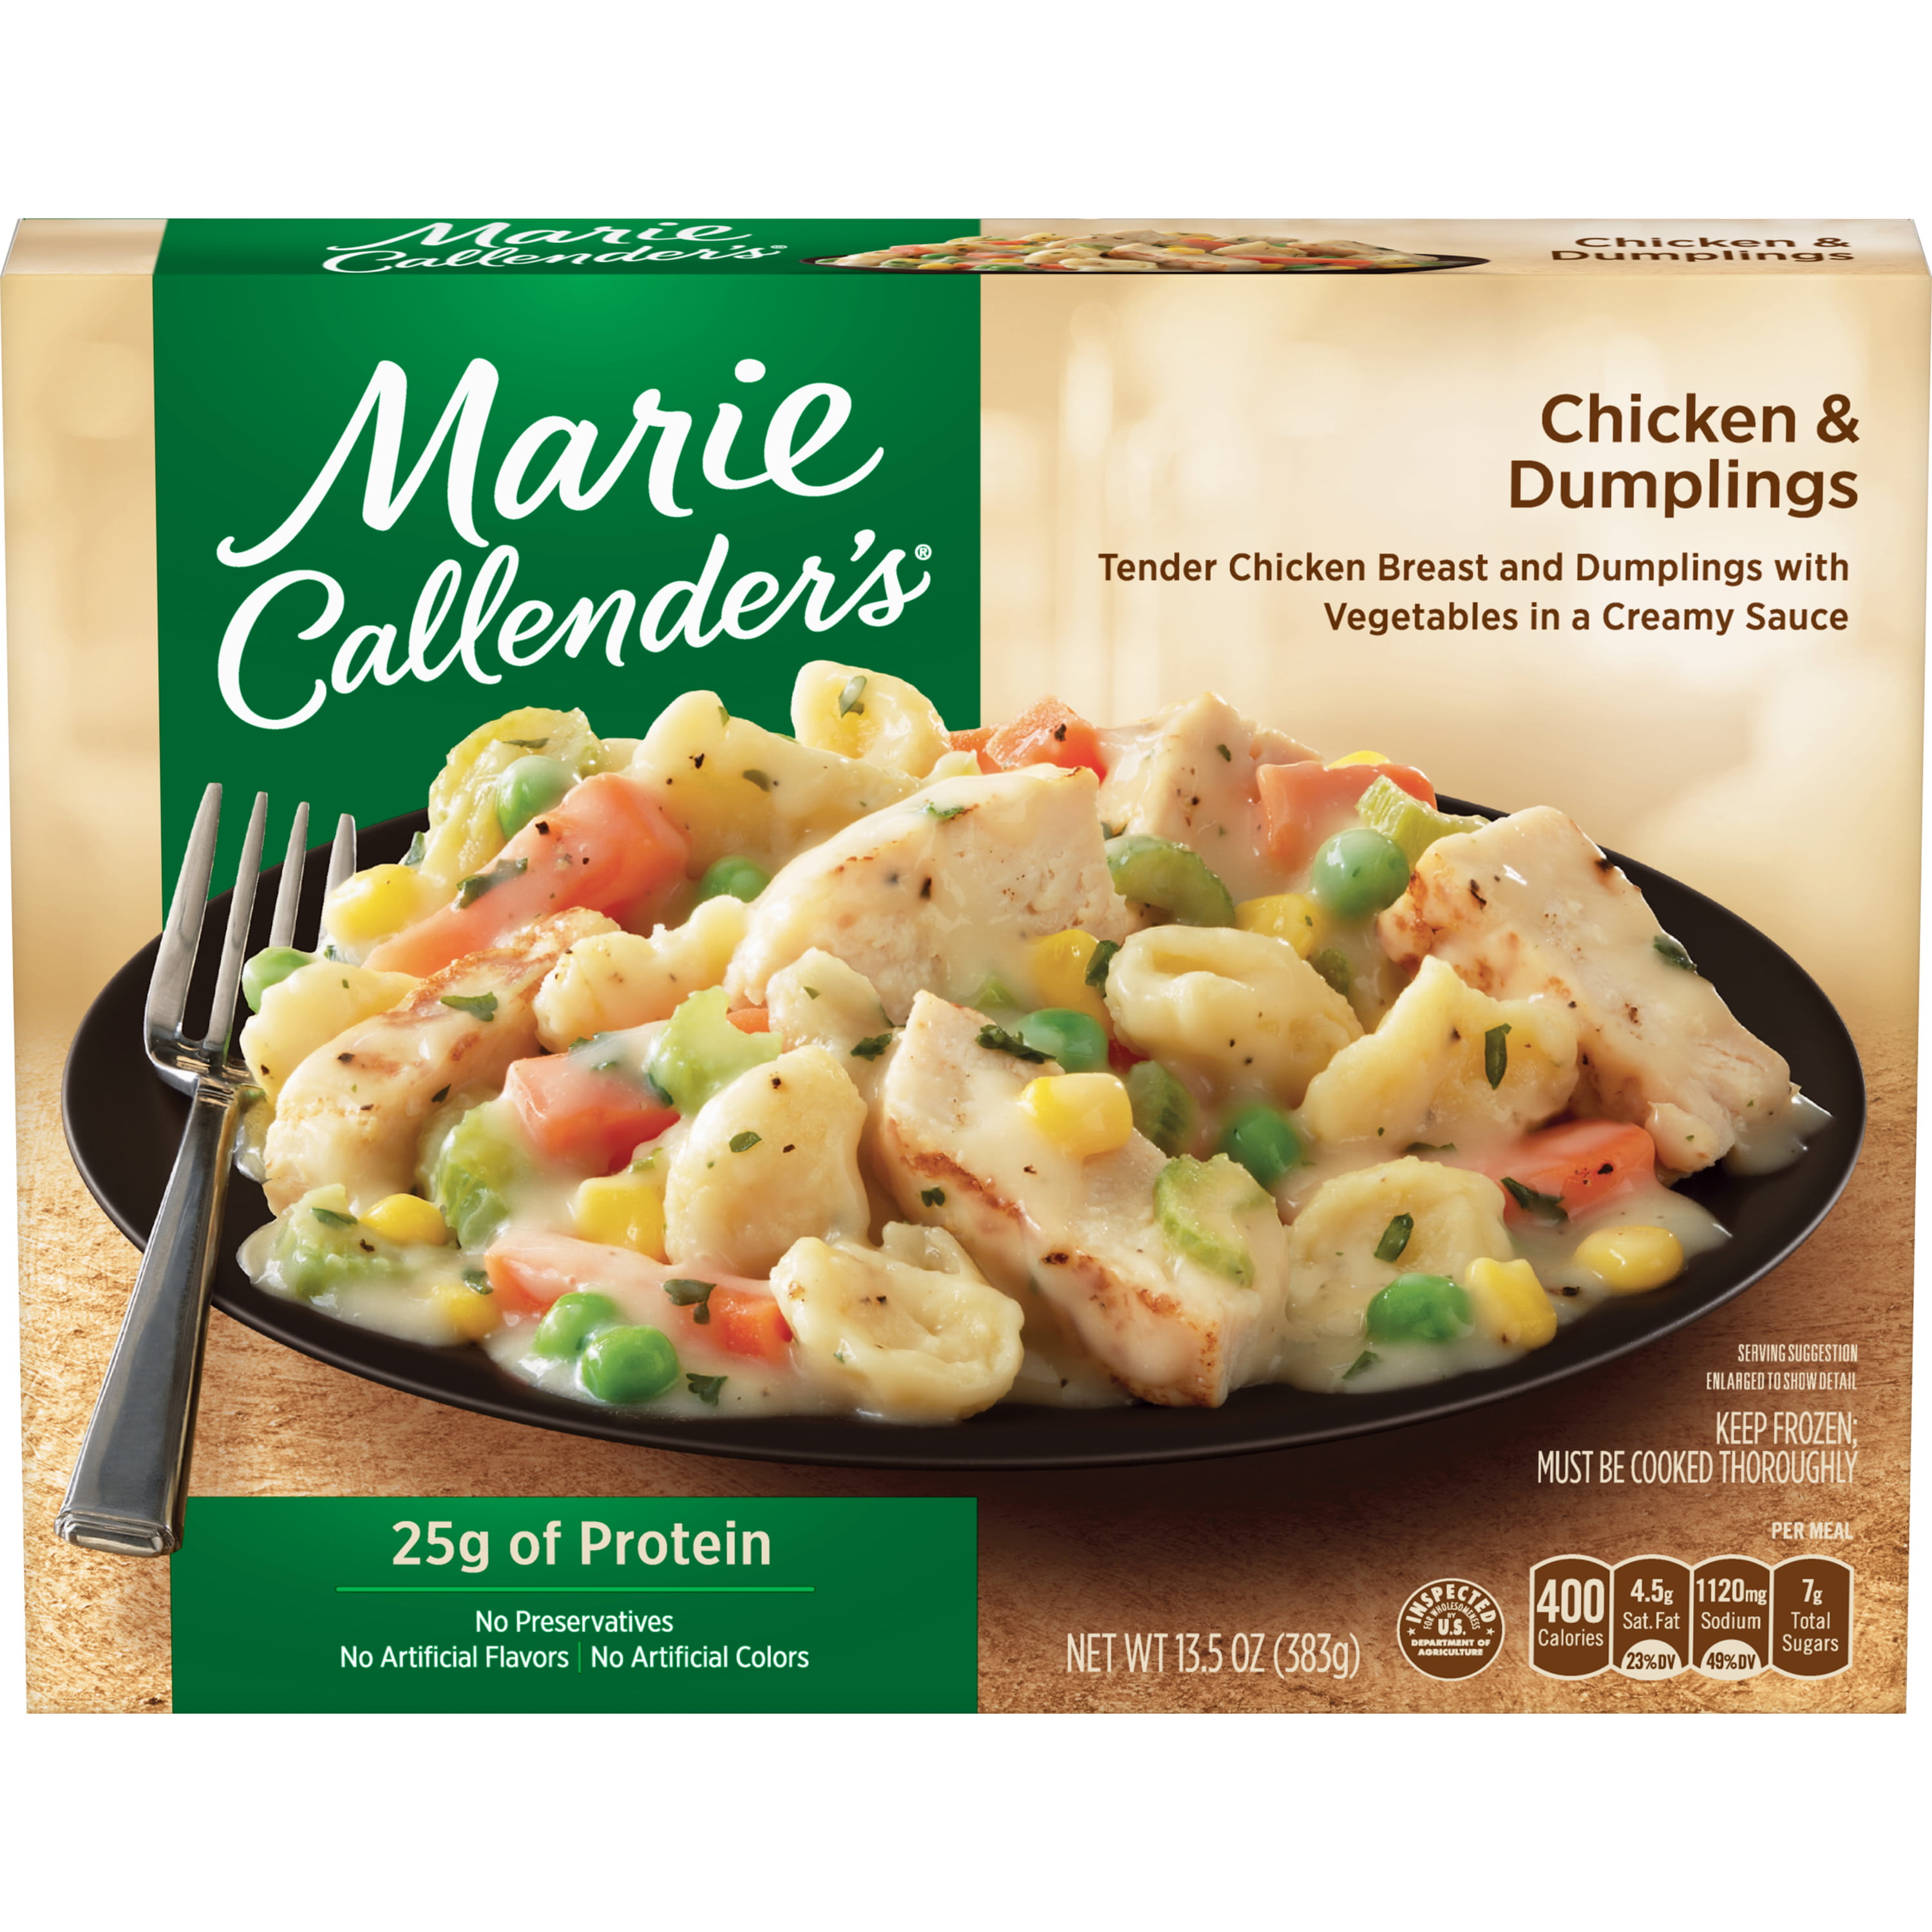 All Time top 15 Marie Calender Dinners – Easy Recipes To Make at Home